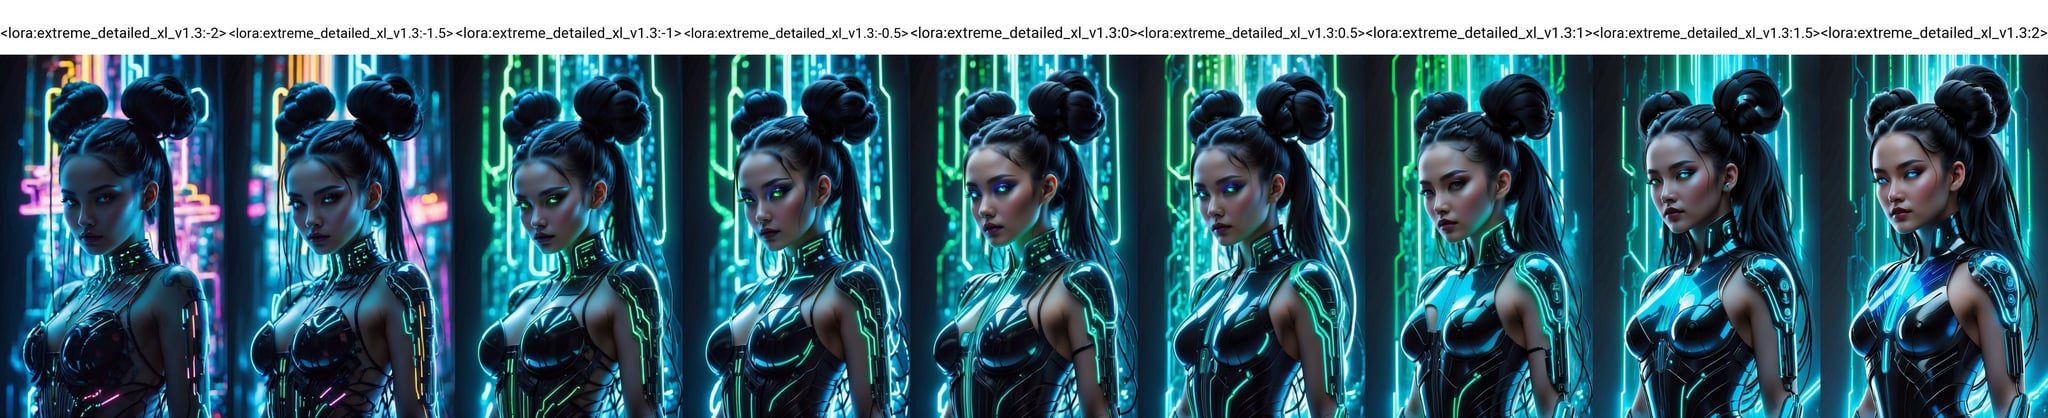 (best quality,8K,highres,masterpiece), ultra-detailed, (masterpiece, best quality, ultra-detailed:1.3), cyberpunk woman adorned with long black hair fashioned into space buns. In this ethereal scene, she embodies the role of the goddess of horticulture, surrounded by millions of microscopic, ultra-bright blue neon strings emanating from her form. composition showcases a stunningly beautiful backlit silhouette, intricately detailed and adorned with neon clouds, creating a mesmerizing and vivid blue color palette <lora:extreme_detailed_xl_v1.3:-2>